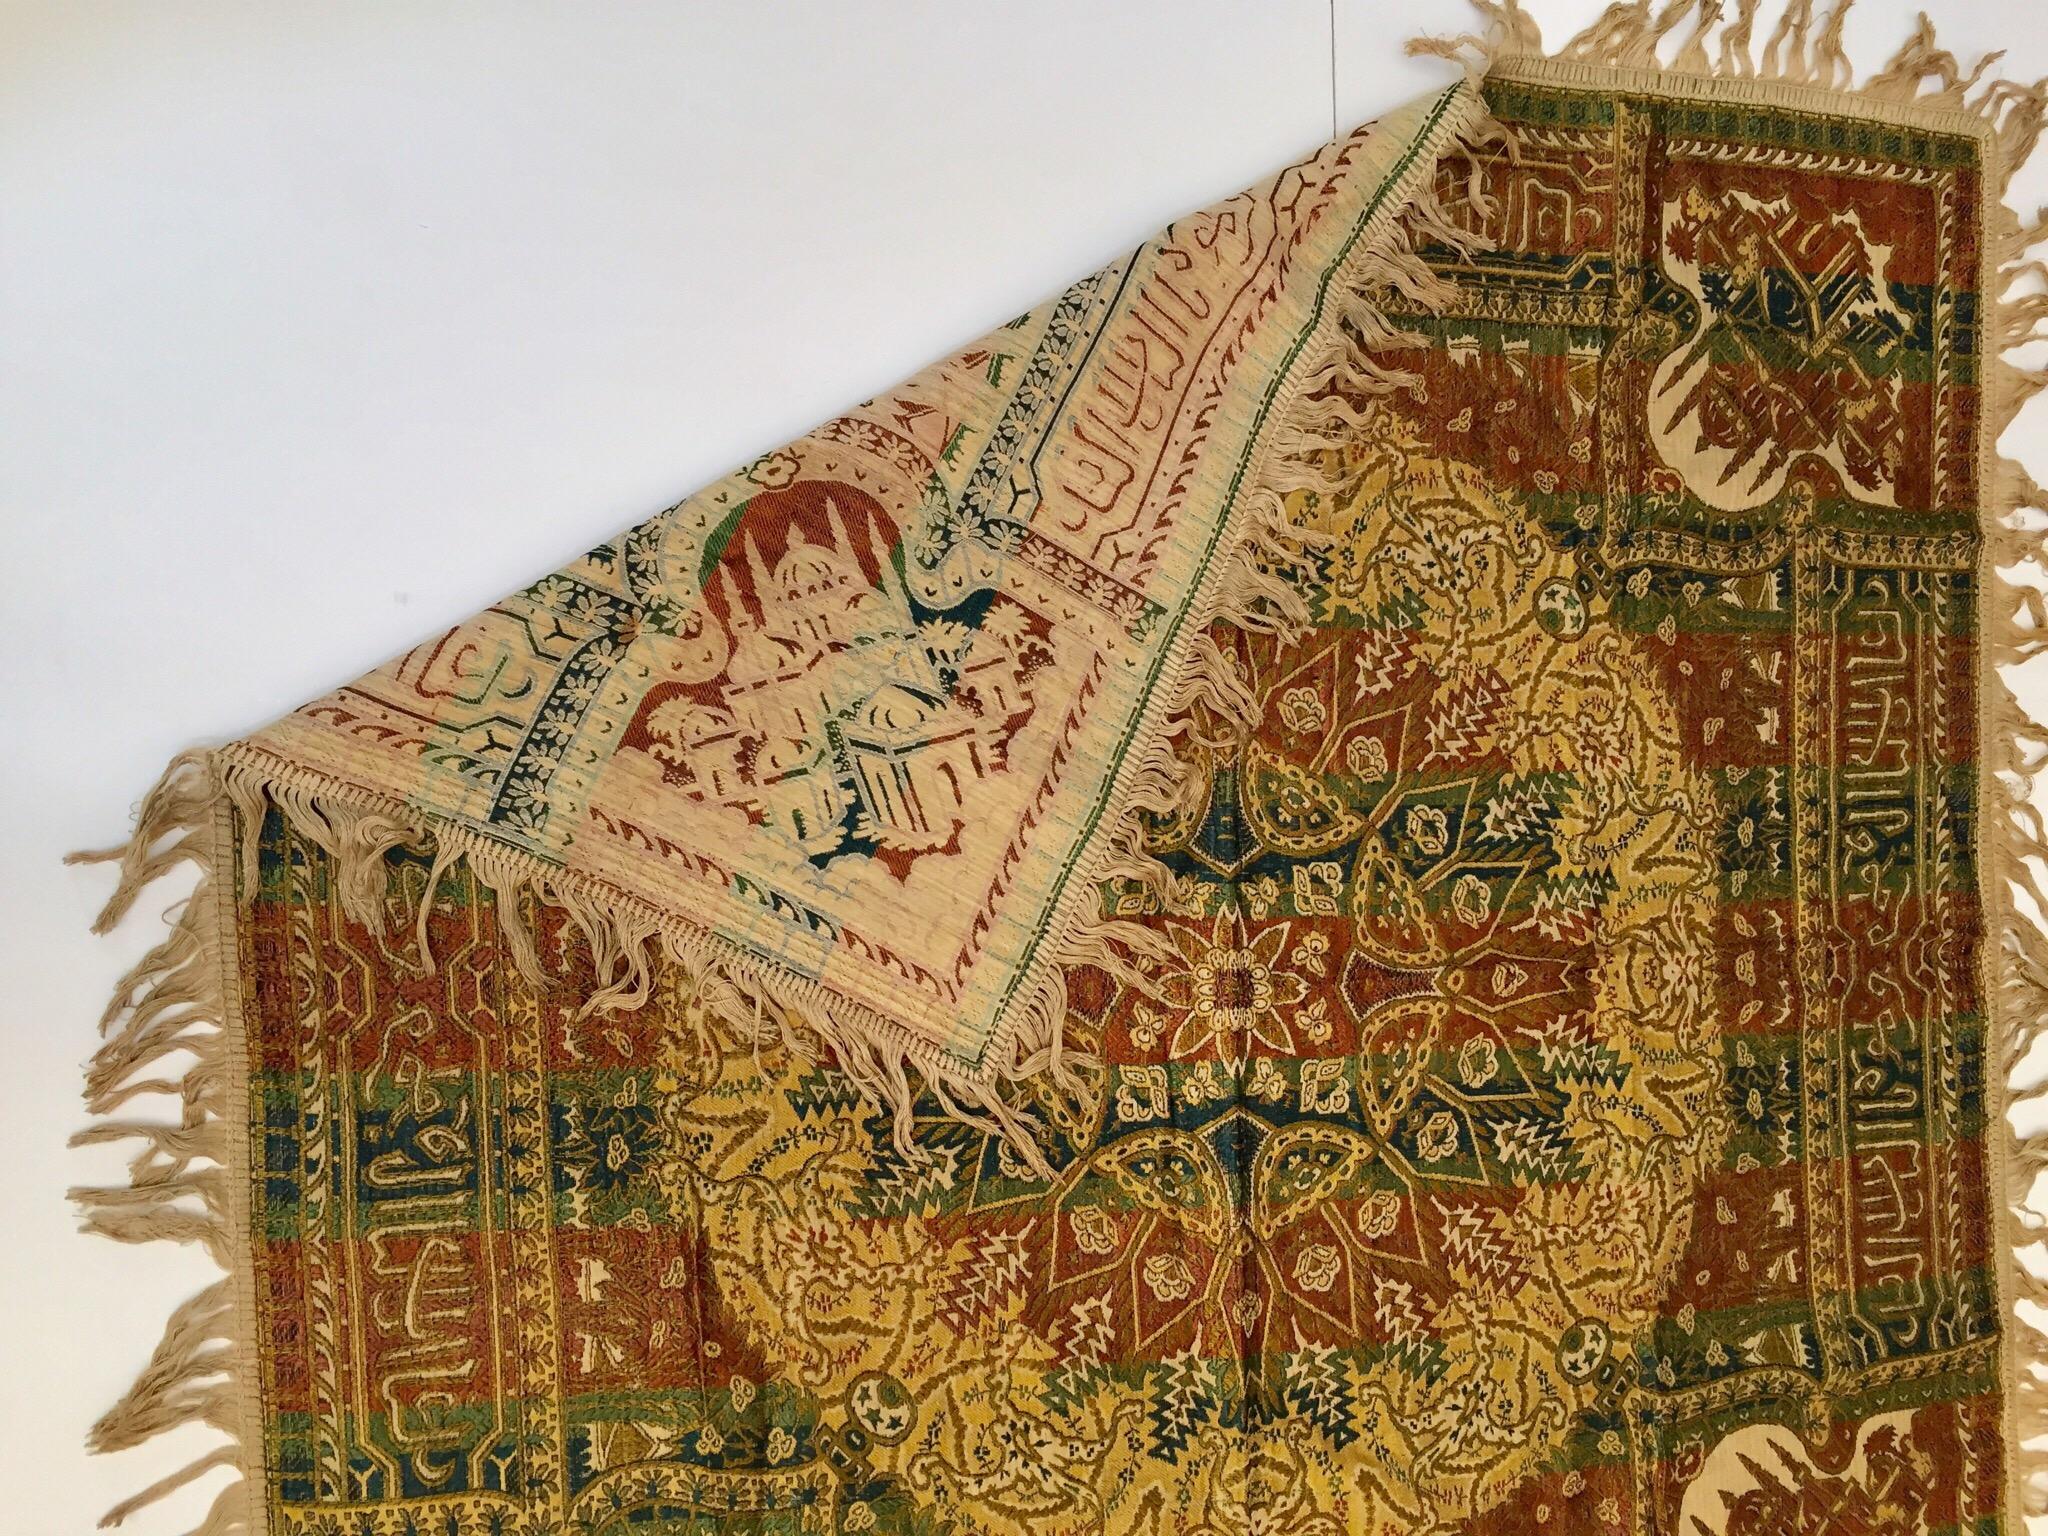 Granada Islamic Spain Textile with Arabic Calligraphy Writing For Sale ...